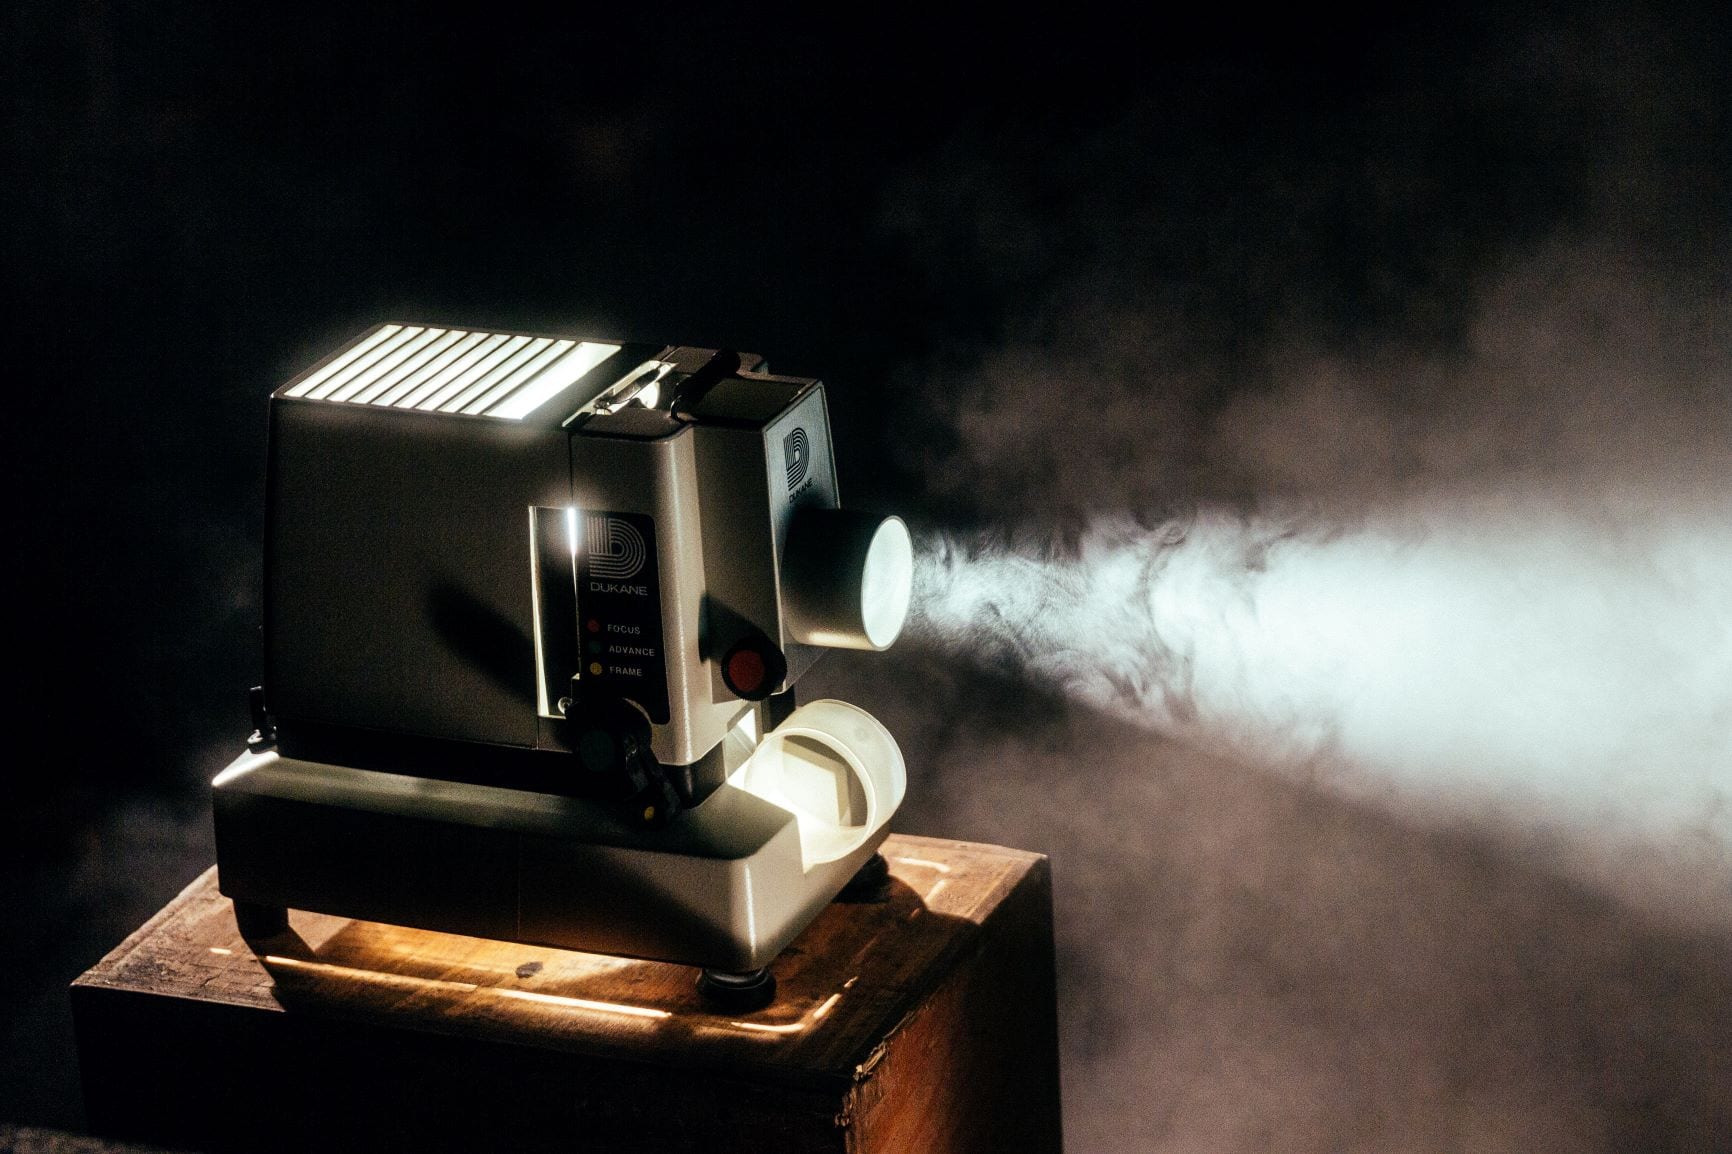 Lights Go Down header image is a Picture of a vintage projector courtesy of Jeremy Yap on Unsplash for Notorious